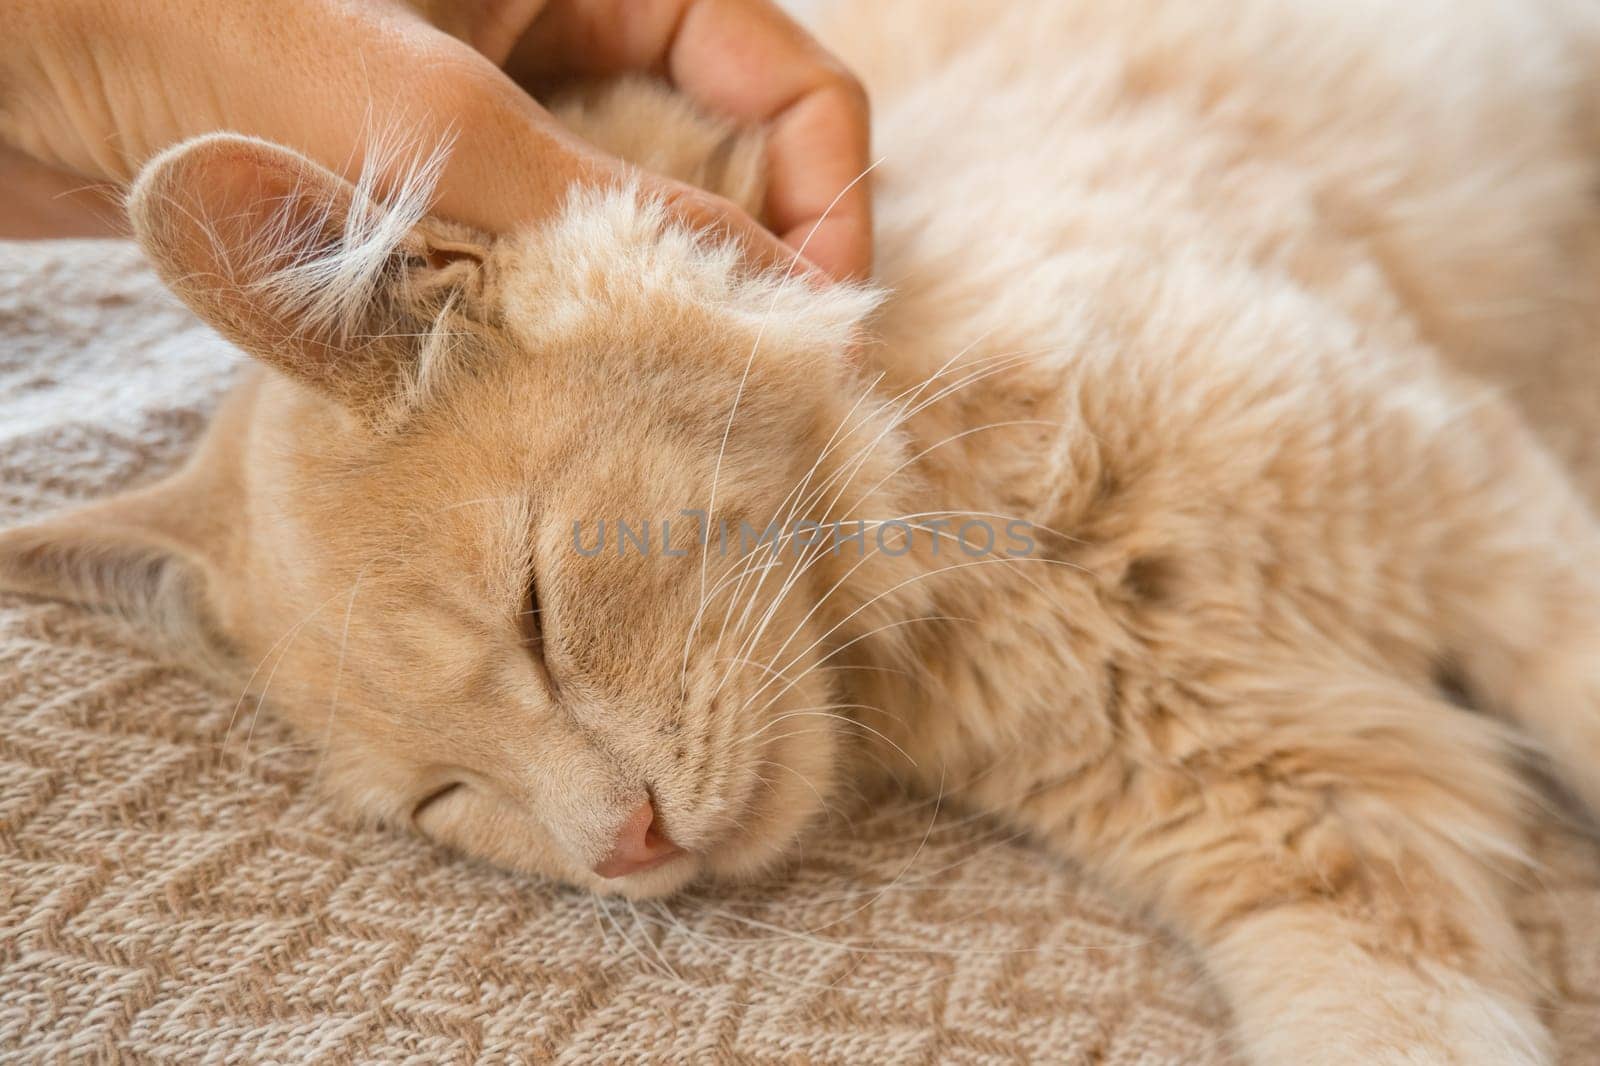 happy cat lovely comfortable sleeping by the woman stroking hand grip at . love to animals concept . by Ekaterina34